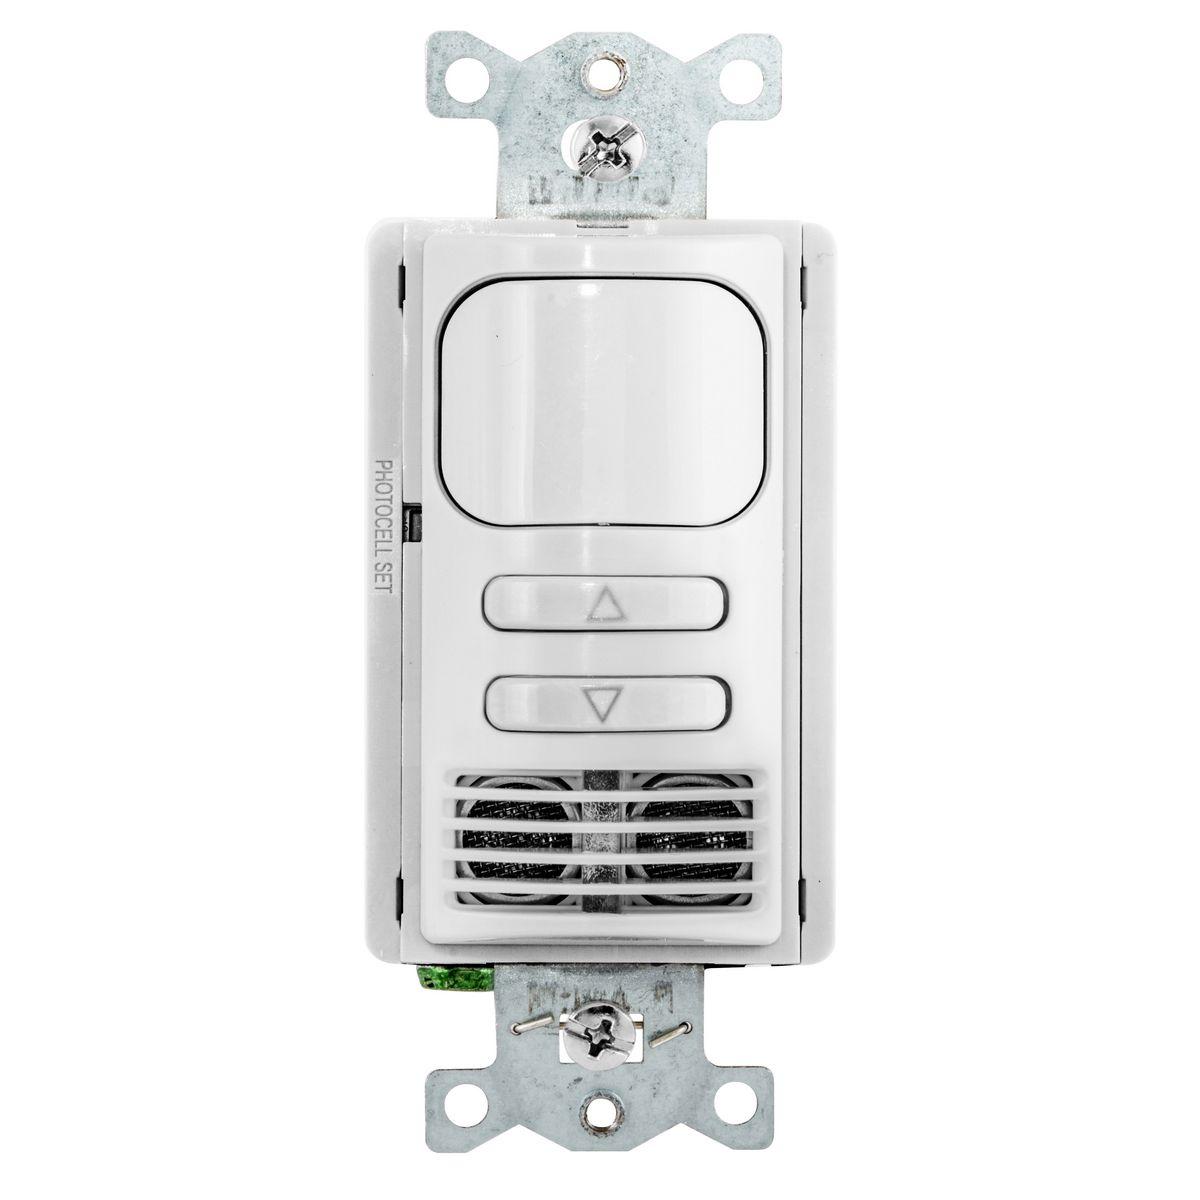 Hubbell ADD2000W1 Switches and Lighting Control, Wall Switch Occupancy Sensor, Dual Technology, 0-10V Dimming, Selectable Auto/Manual On,1-Relay, 120/277VAC,White 